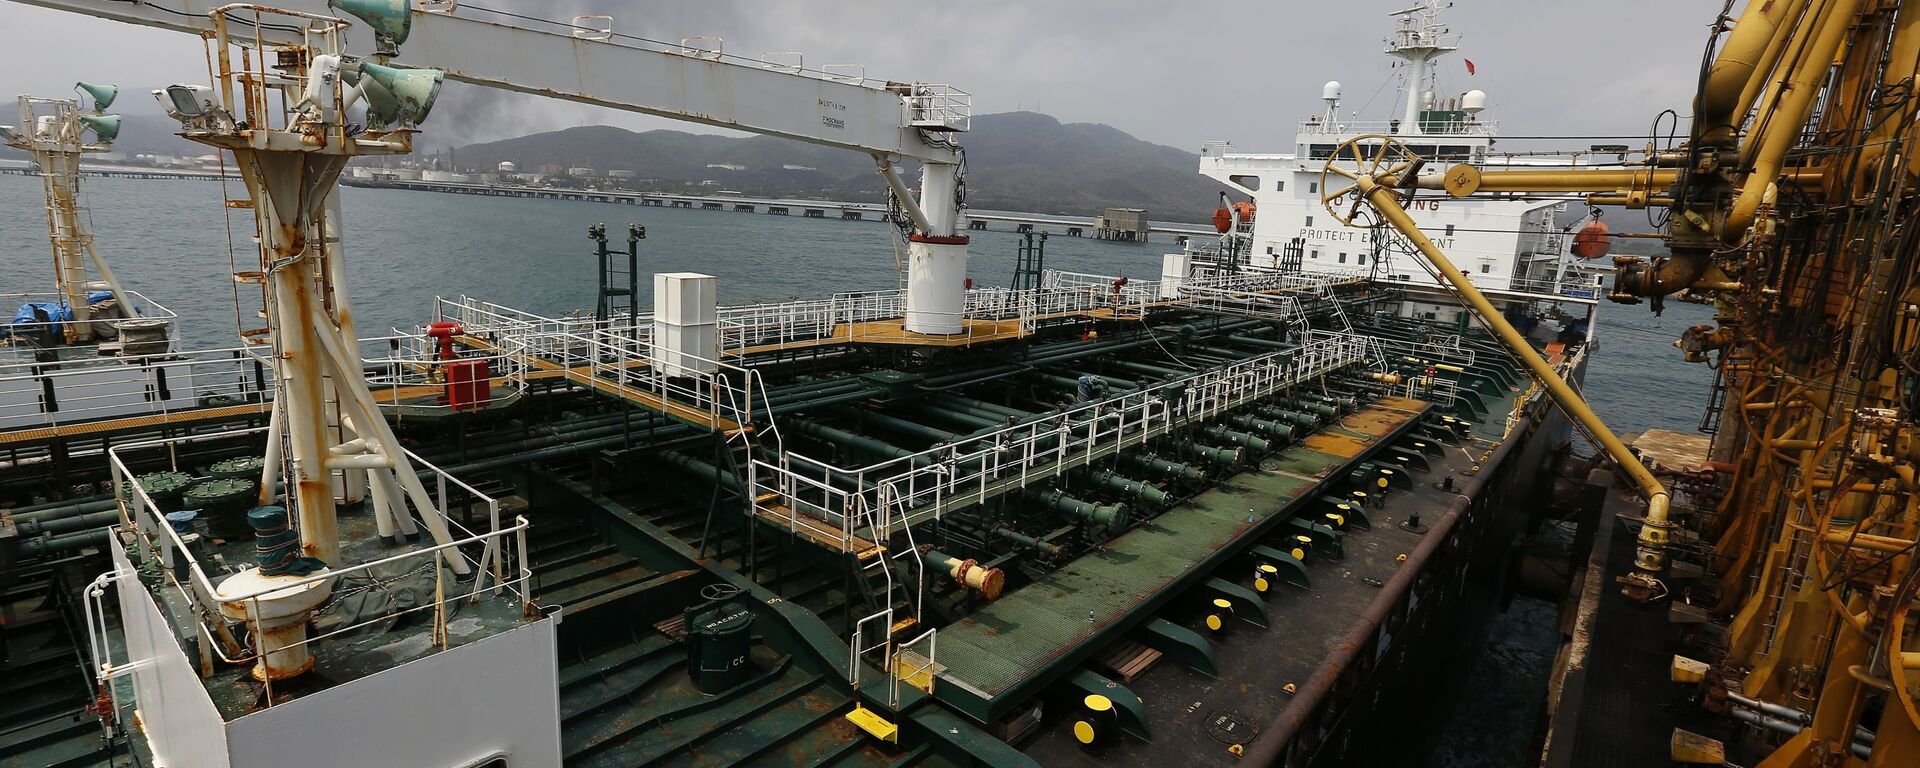 Iranian oil tanker Fortune is anchored at the dock of the El Palito refinery near Puerto Cabello, Venezuela, Monday, May 25, 2020 - Sputnik International, 1920, 04.07.2021